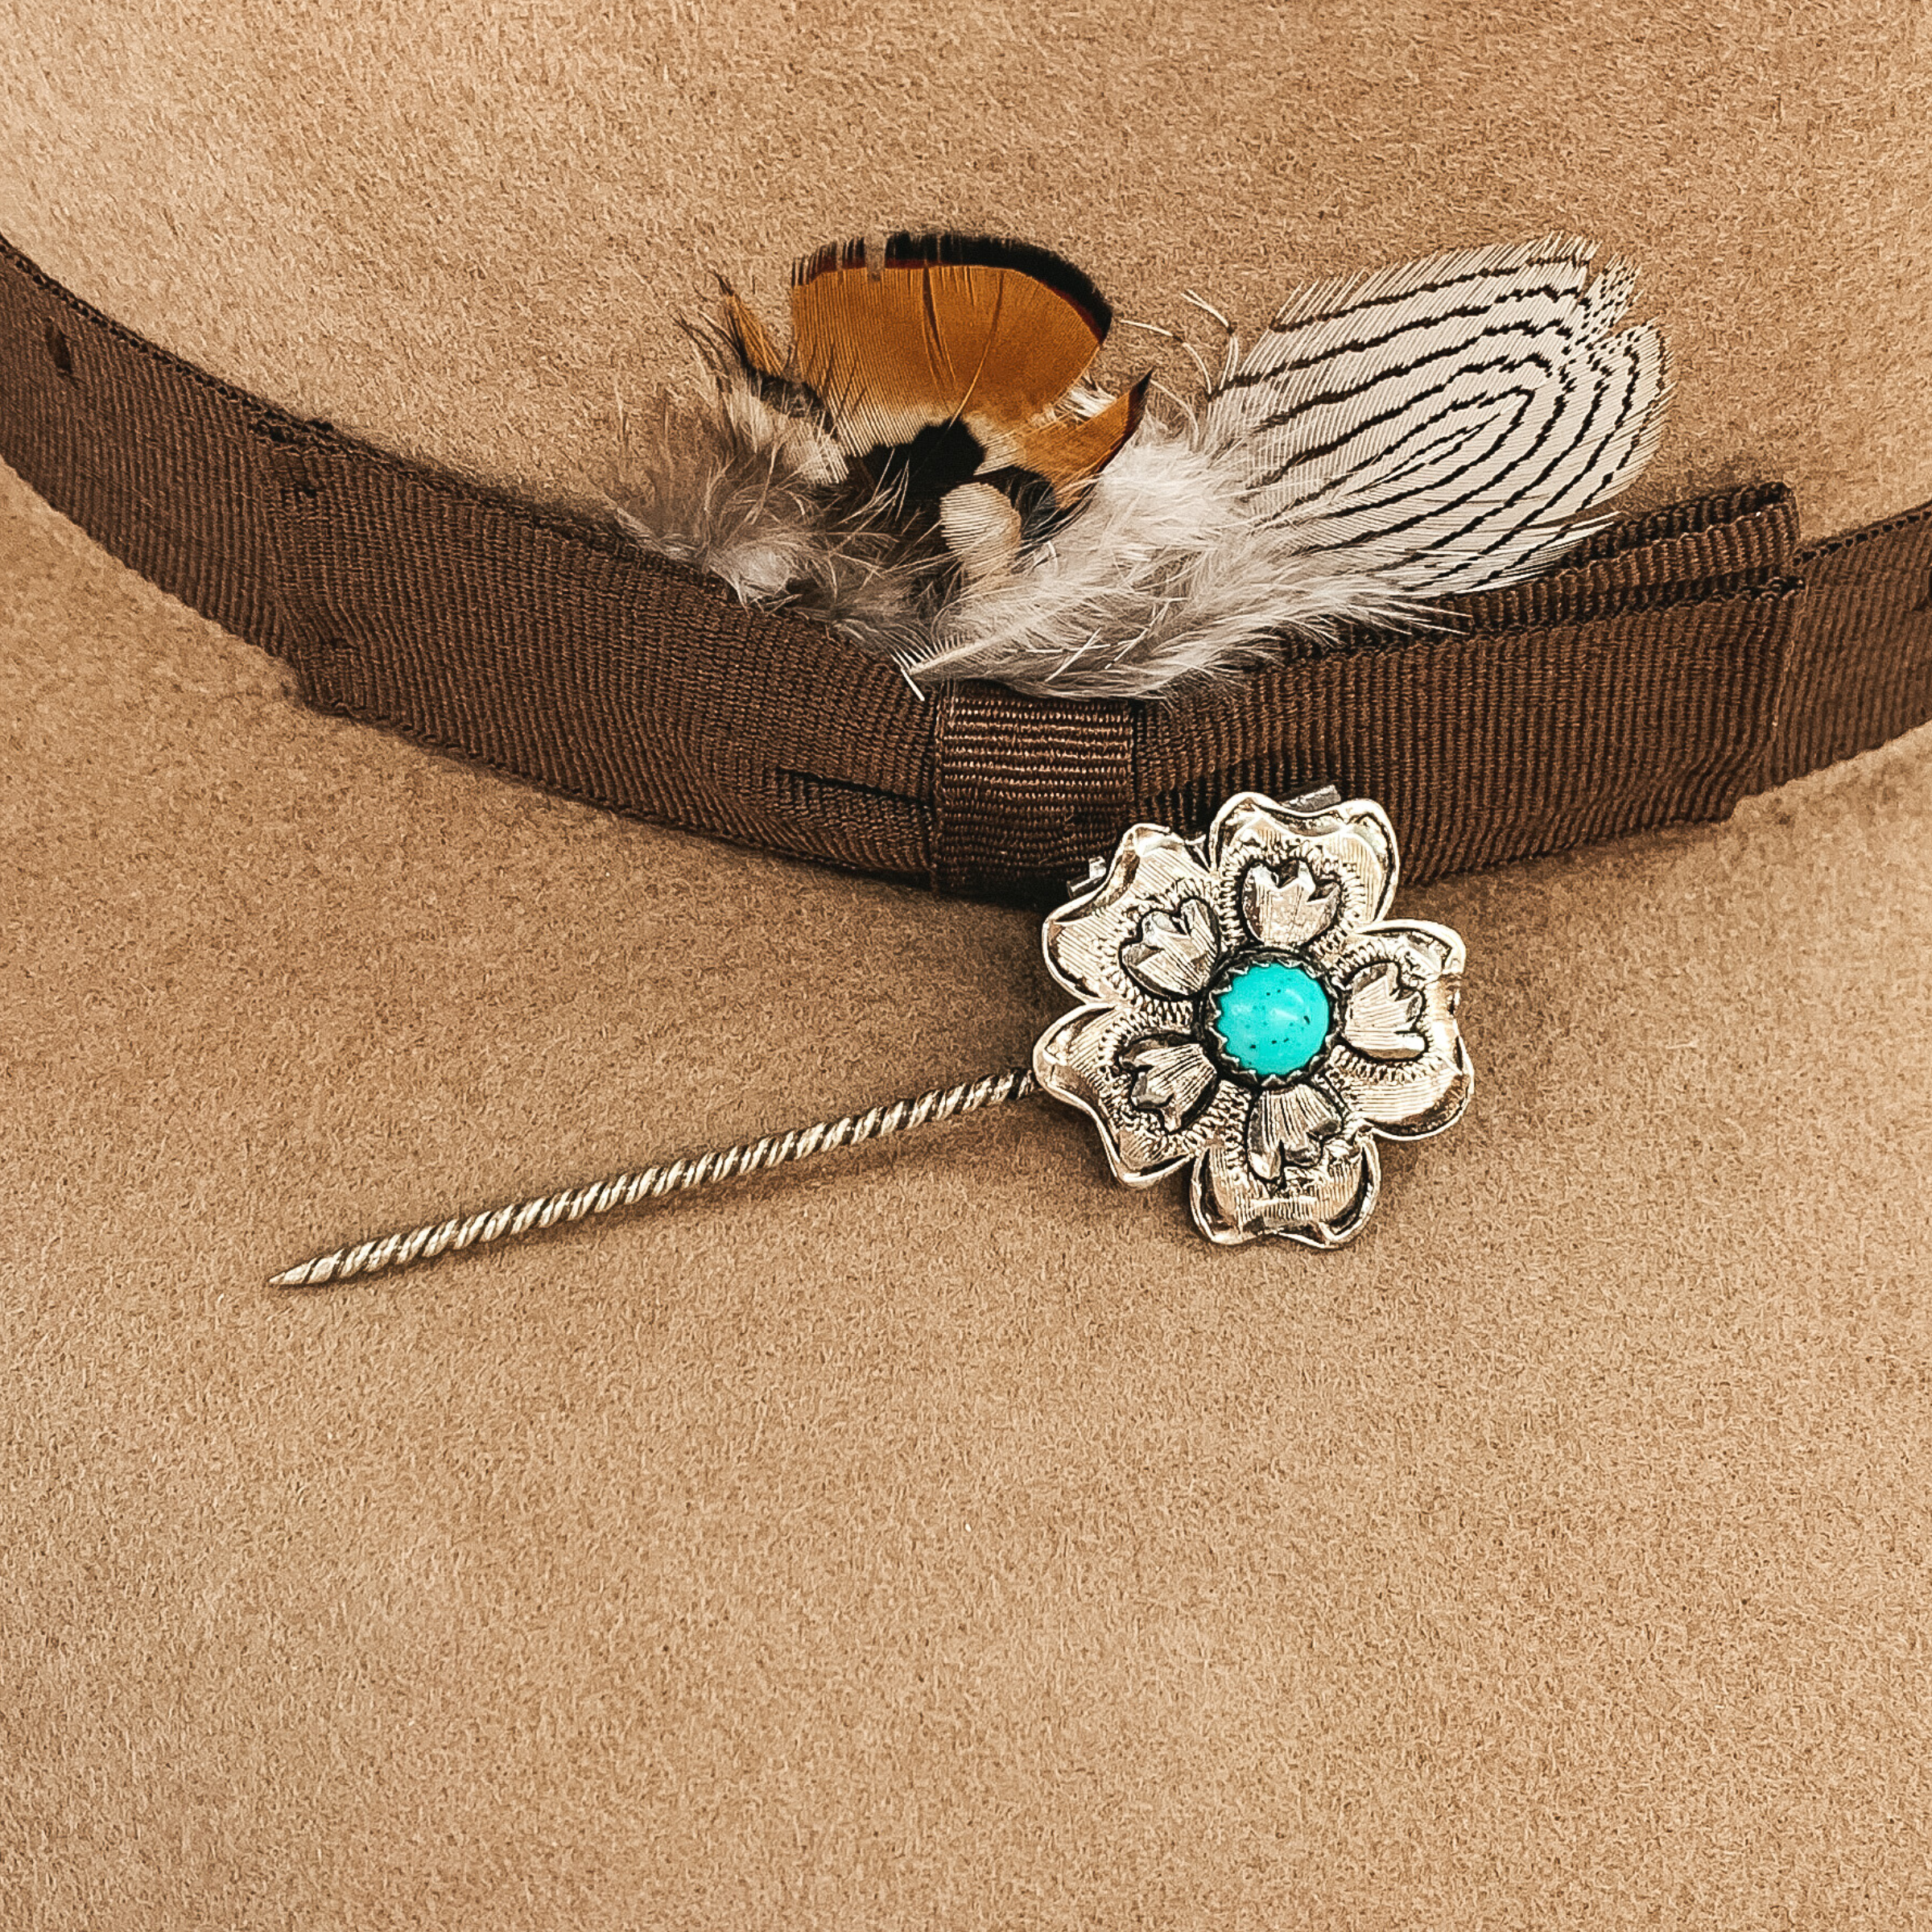 Silver twisted toothpick hat pin with a silver flower pendant. This flower has a lot of small, engraved details around a center turquoise colored stone. This hat pin is pictured on a tan hat.